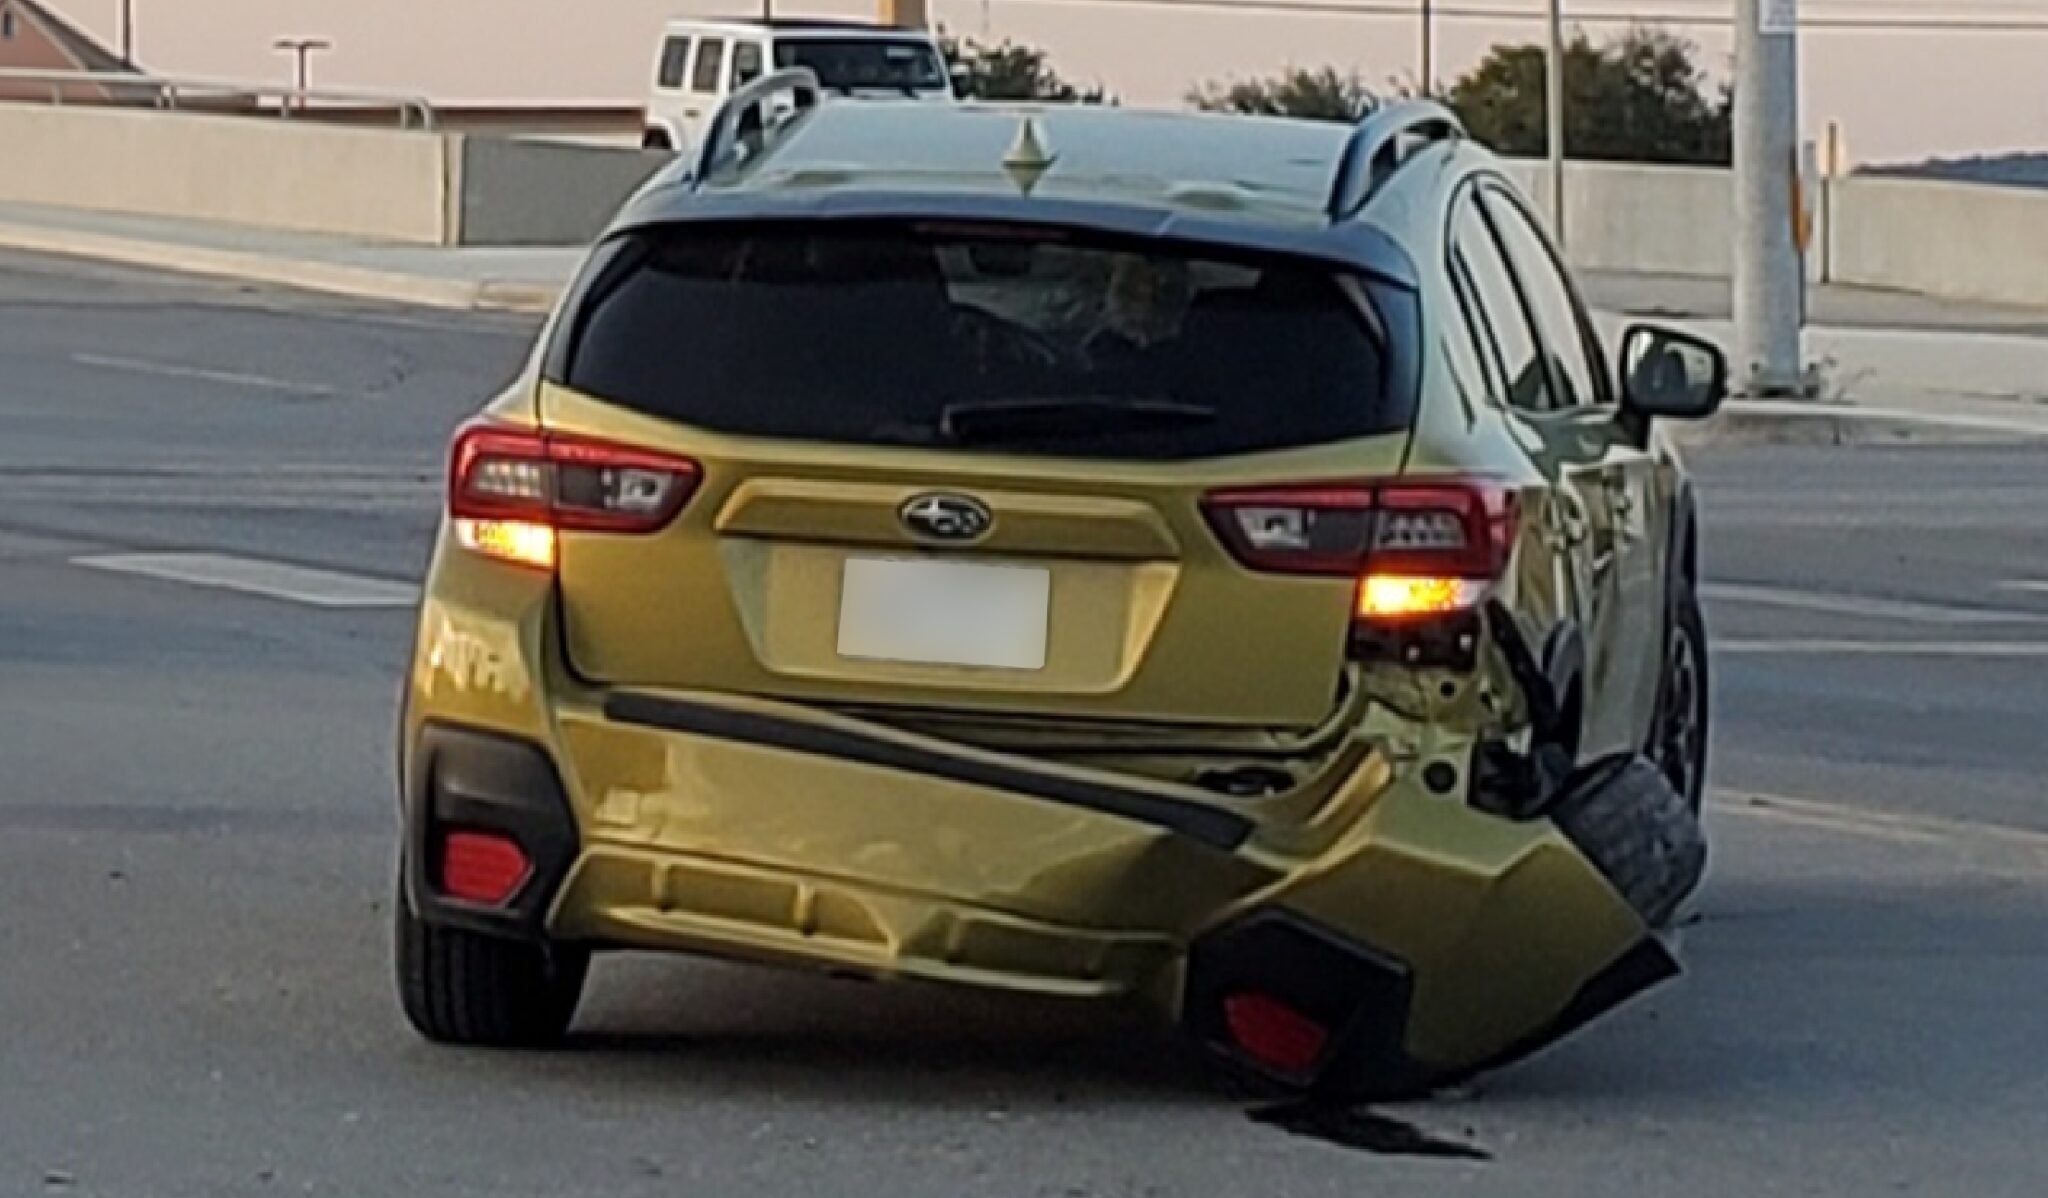 A yellow car with passenger side rear end damage after a car accident